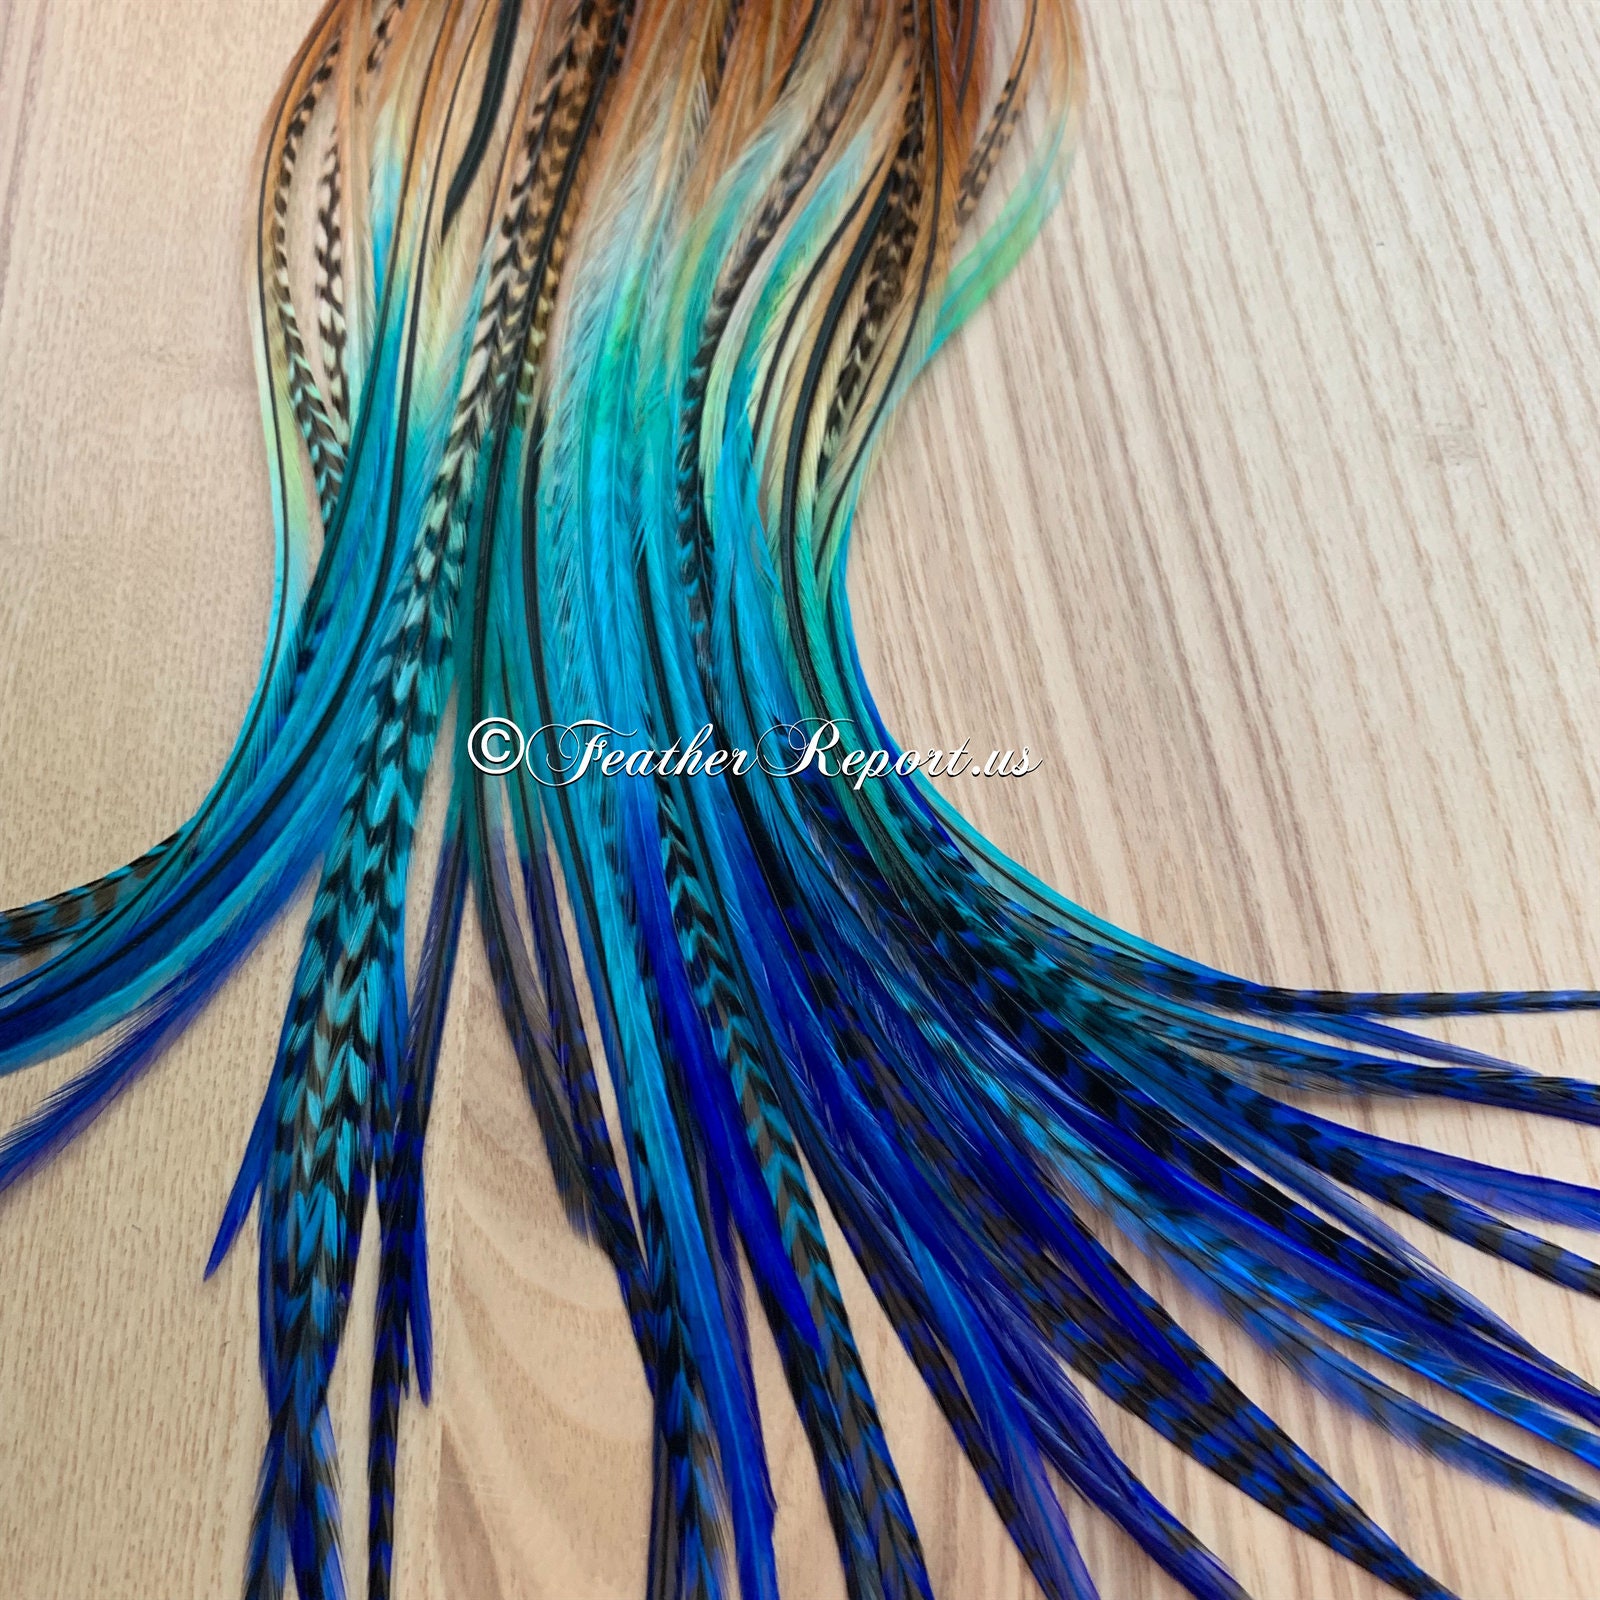 Feather Extensions Ombre Brown Aqua Hair | Etsy